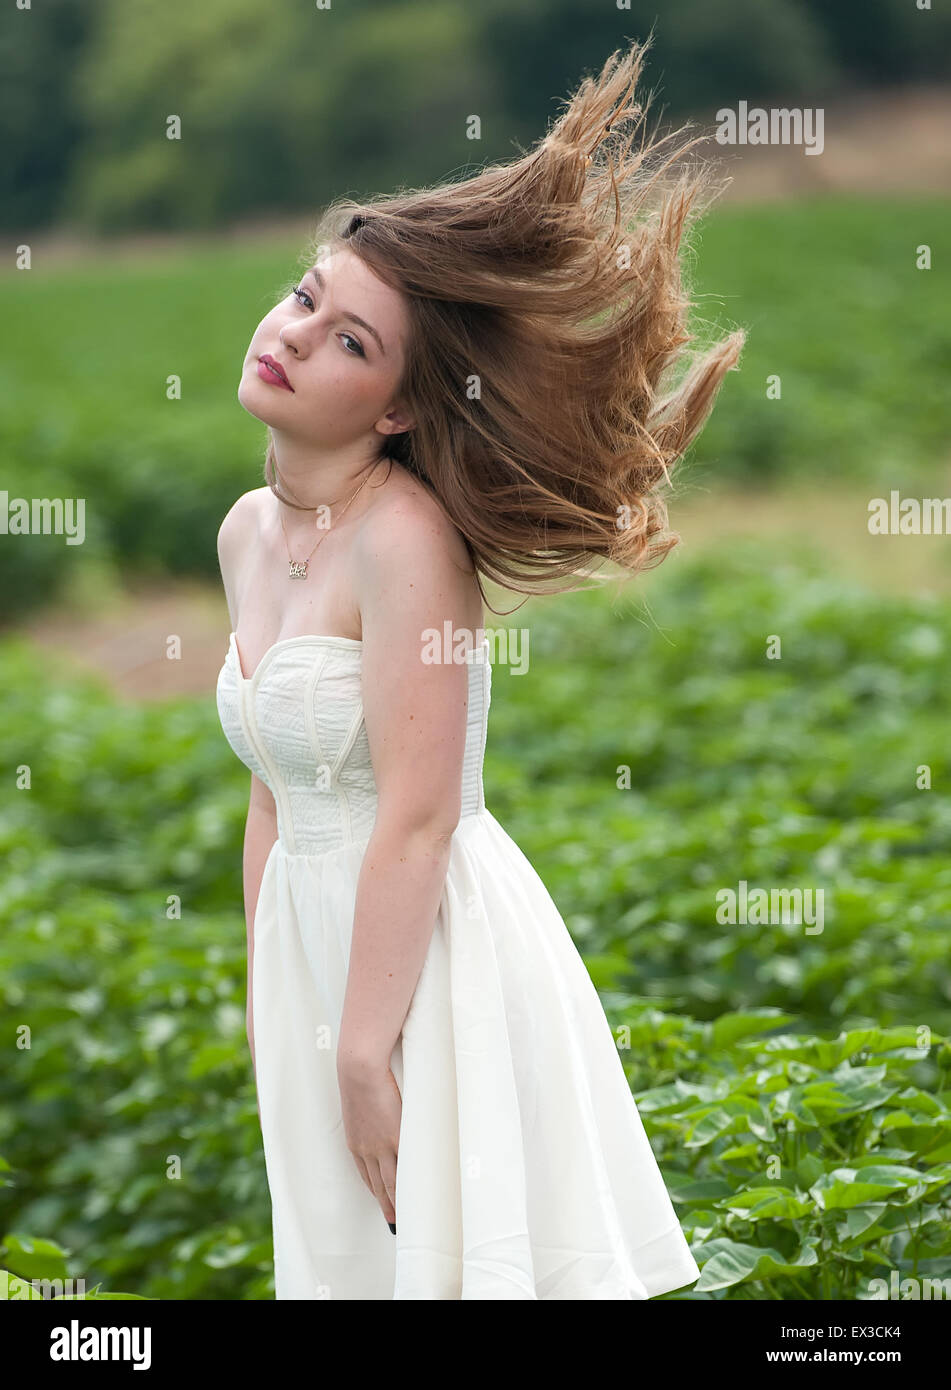 A young woman in a green field, hair blowing in the wind. Kibbutz Ha'solelim, Israel Stock Photo